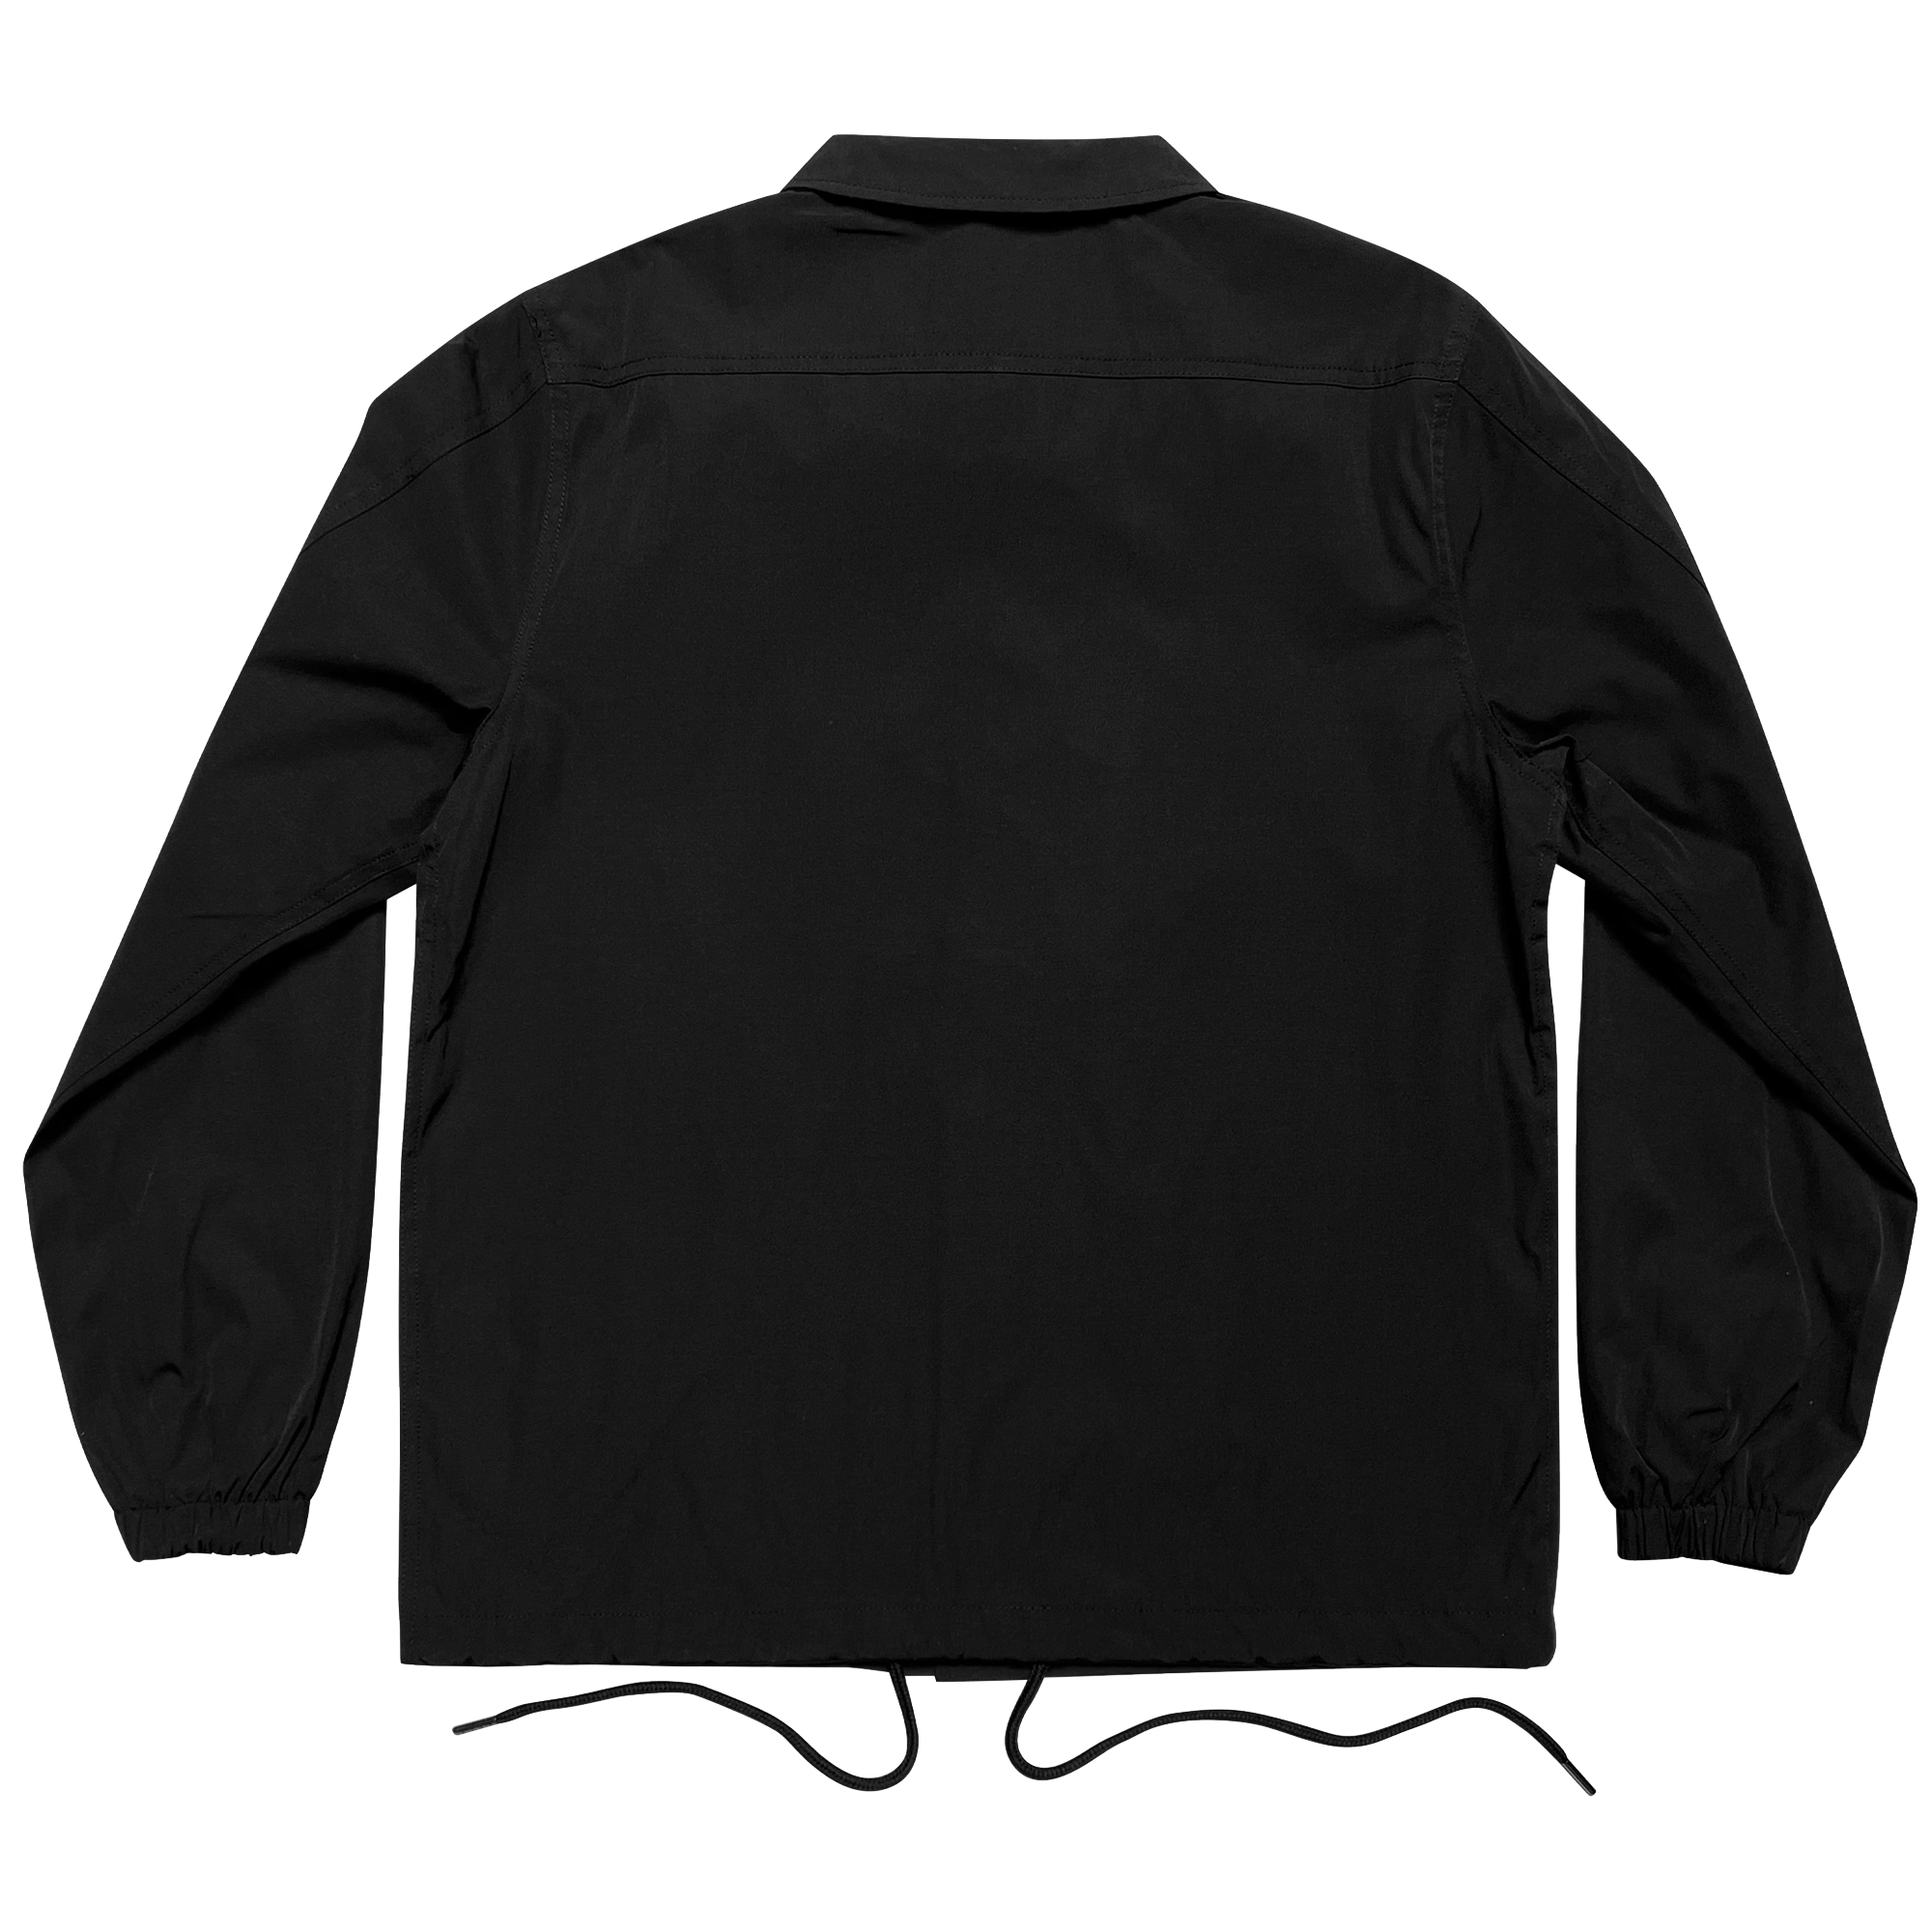 Back side of black coaches jacket with waist draw strings.